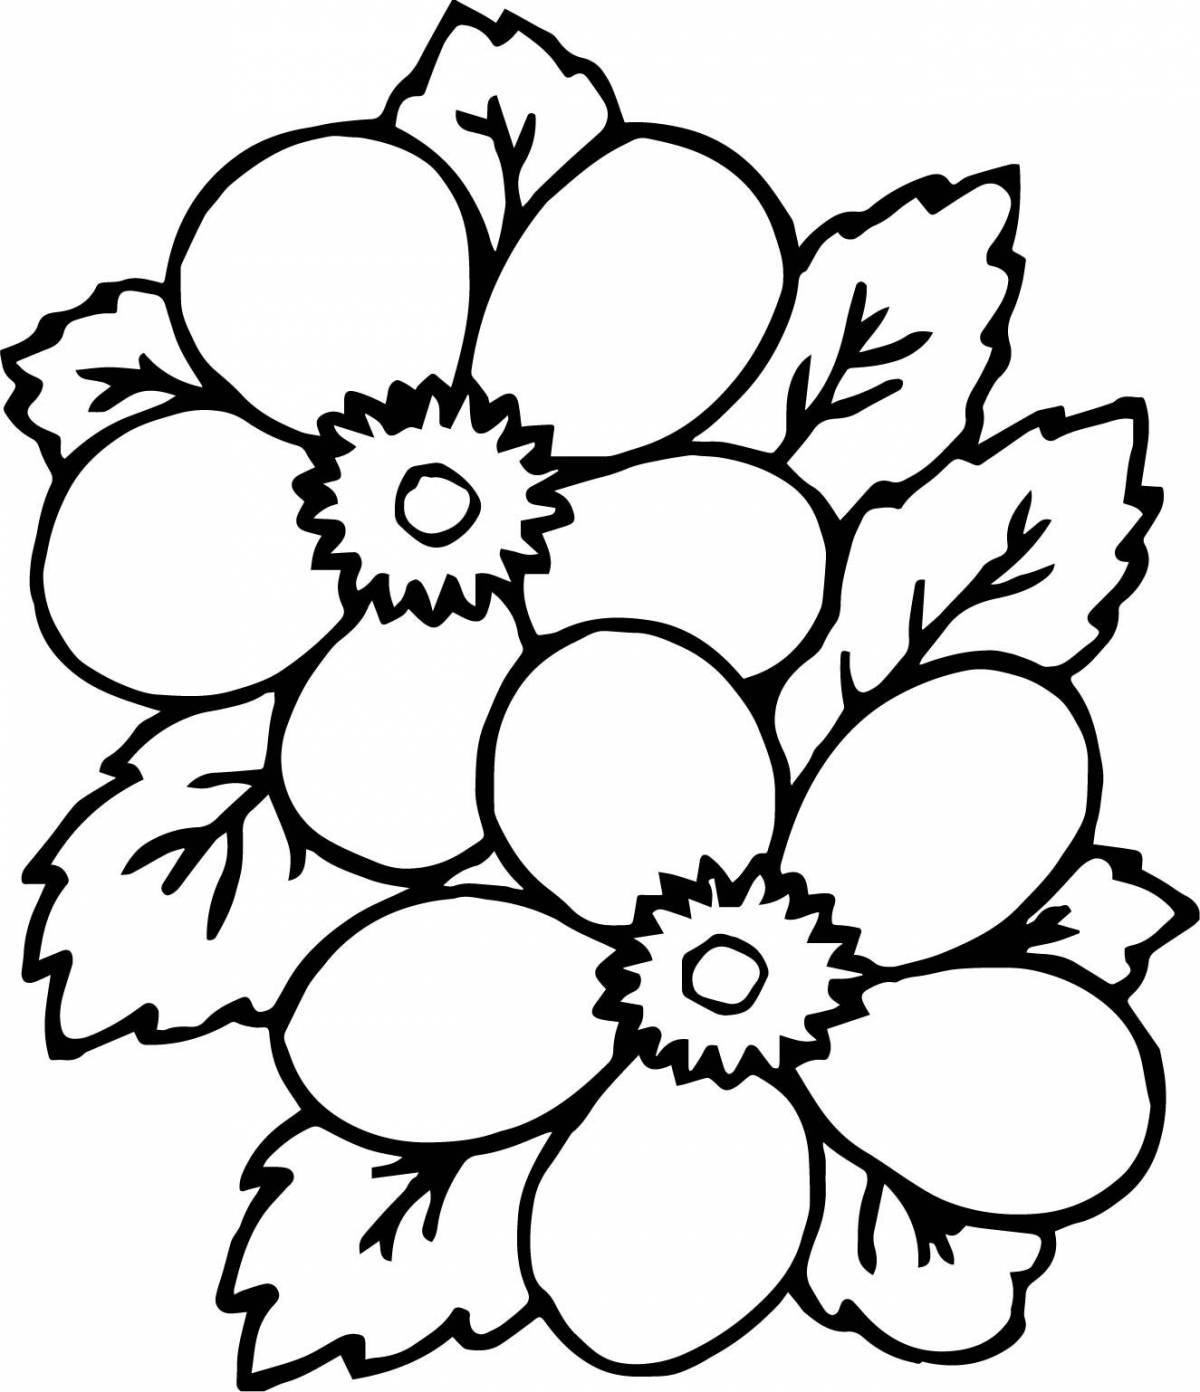 Outstanding cauliflower coloring page